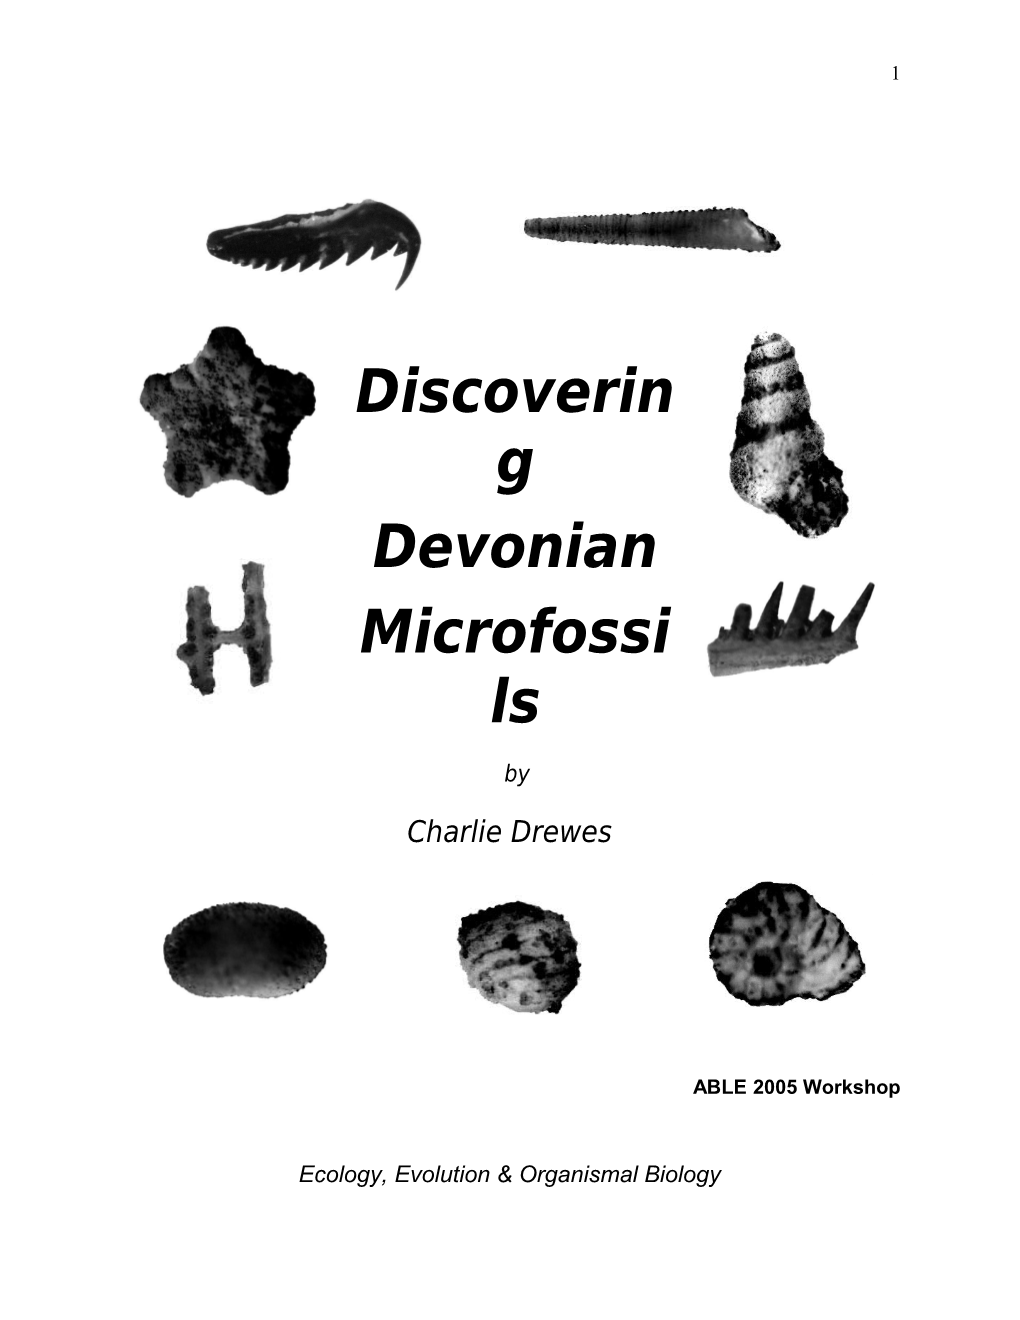 Discovering & Investigating Devonian Microfossils